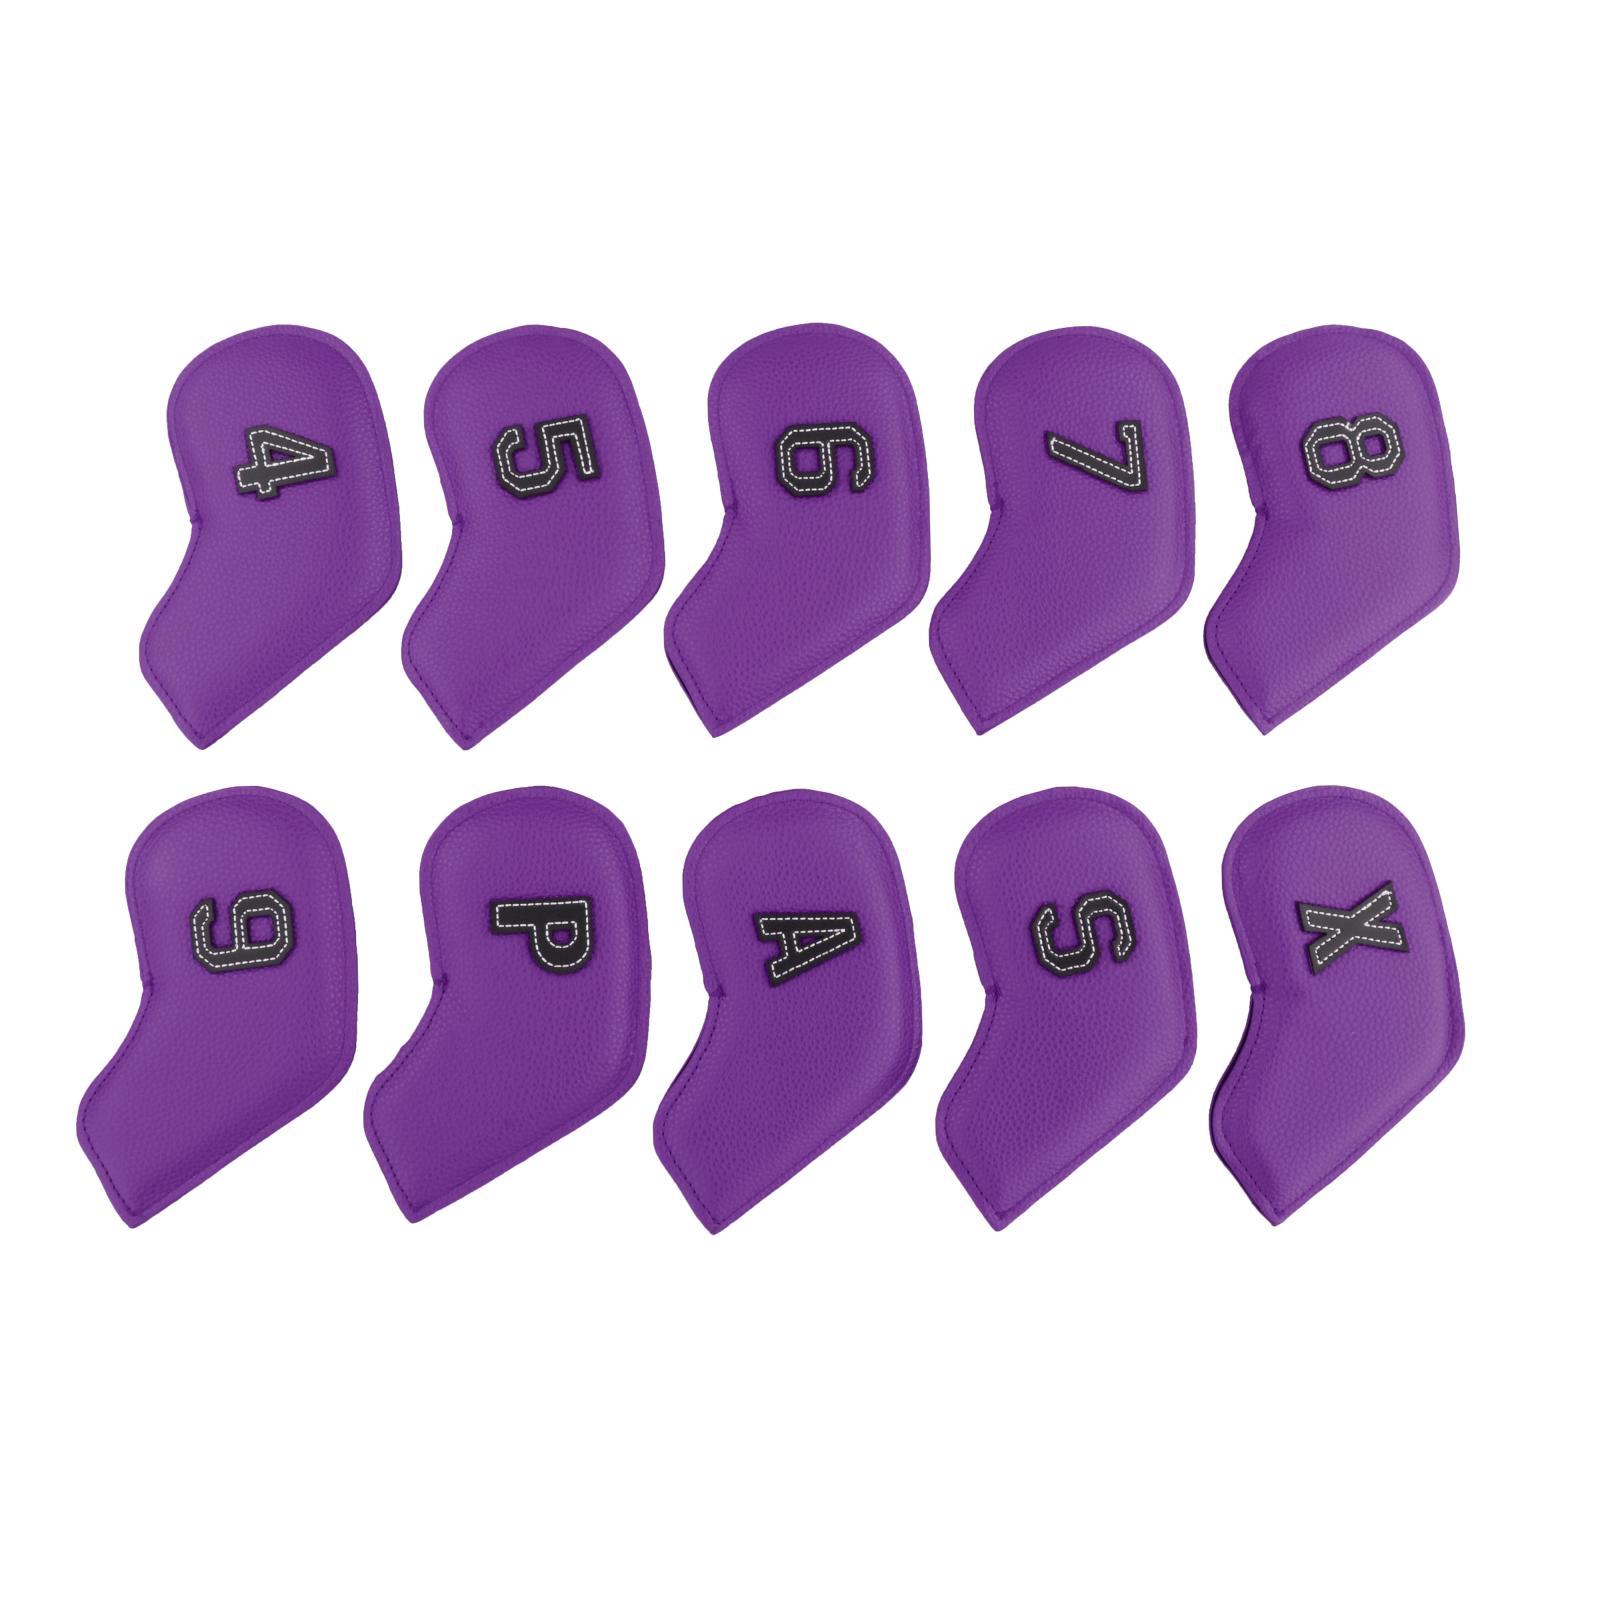 10Pcs Golf Iron Headcover, 4,5,6,7,8,9,A,S,P,X Fits All Brands Purple